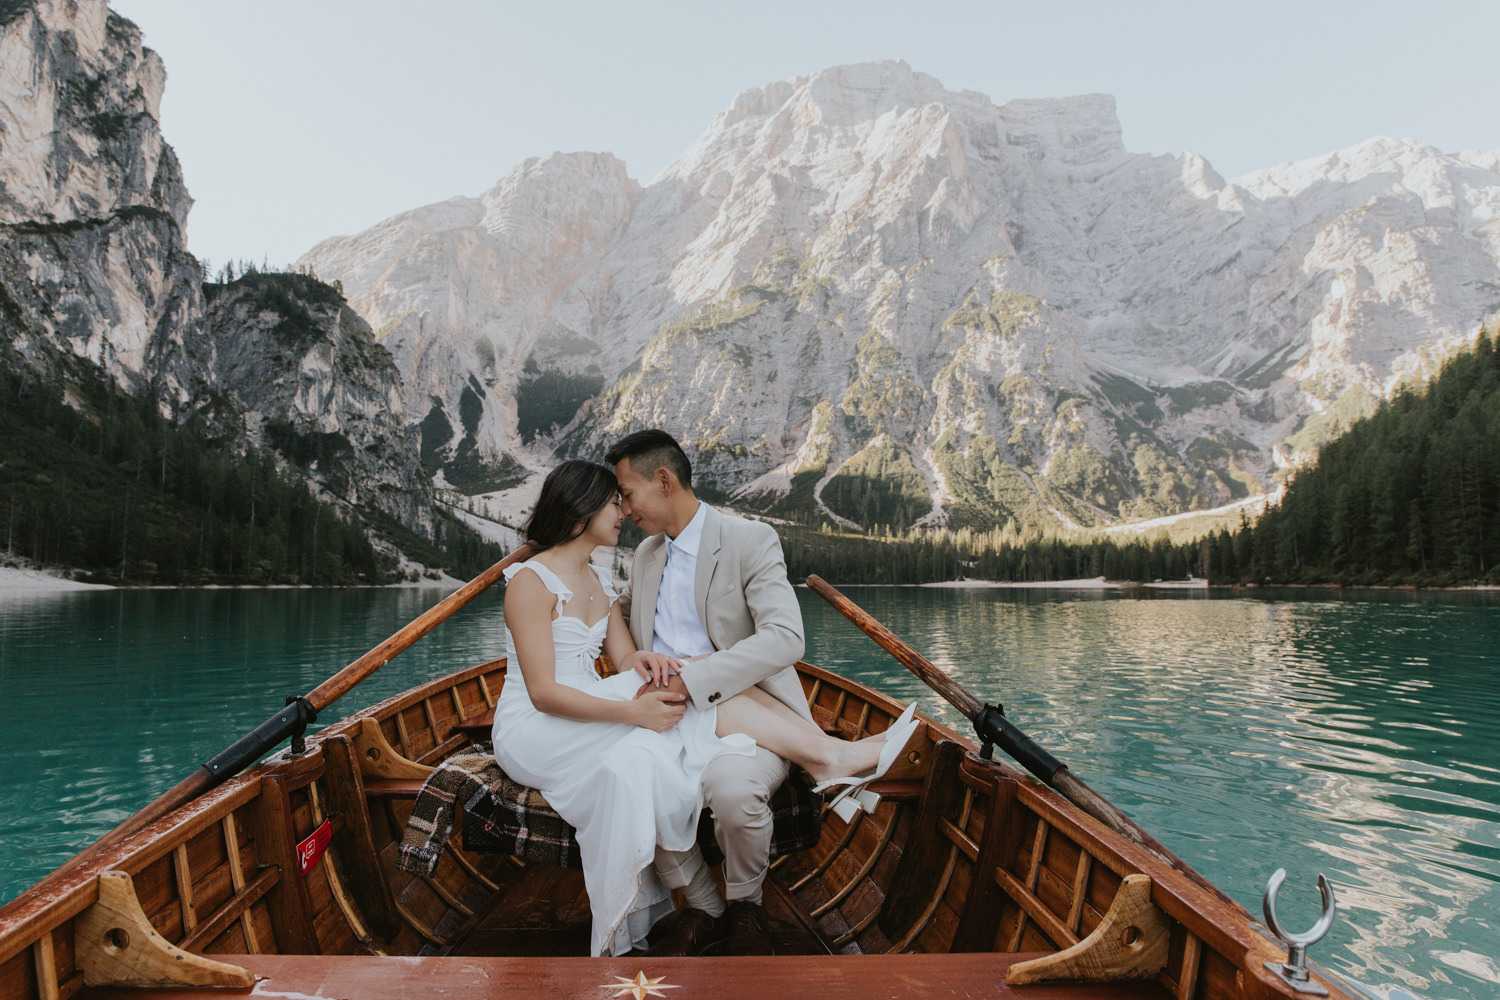 A couple sit face to face in a wooden boat on the famous Lago di Braies in the Italian Dolomites. The water around them is blue green and the mountains behind them are lit by sunlight.